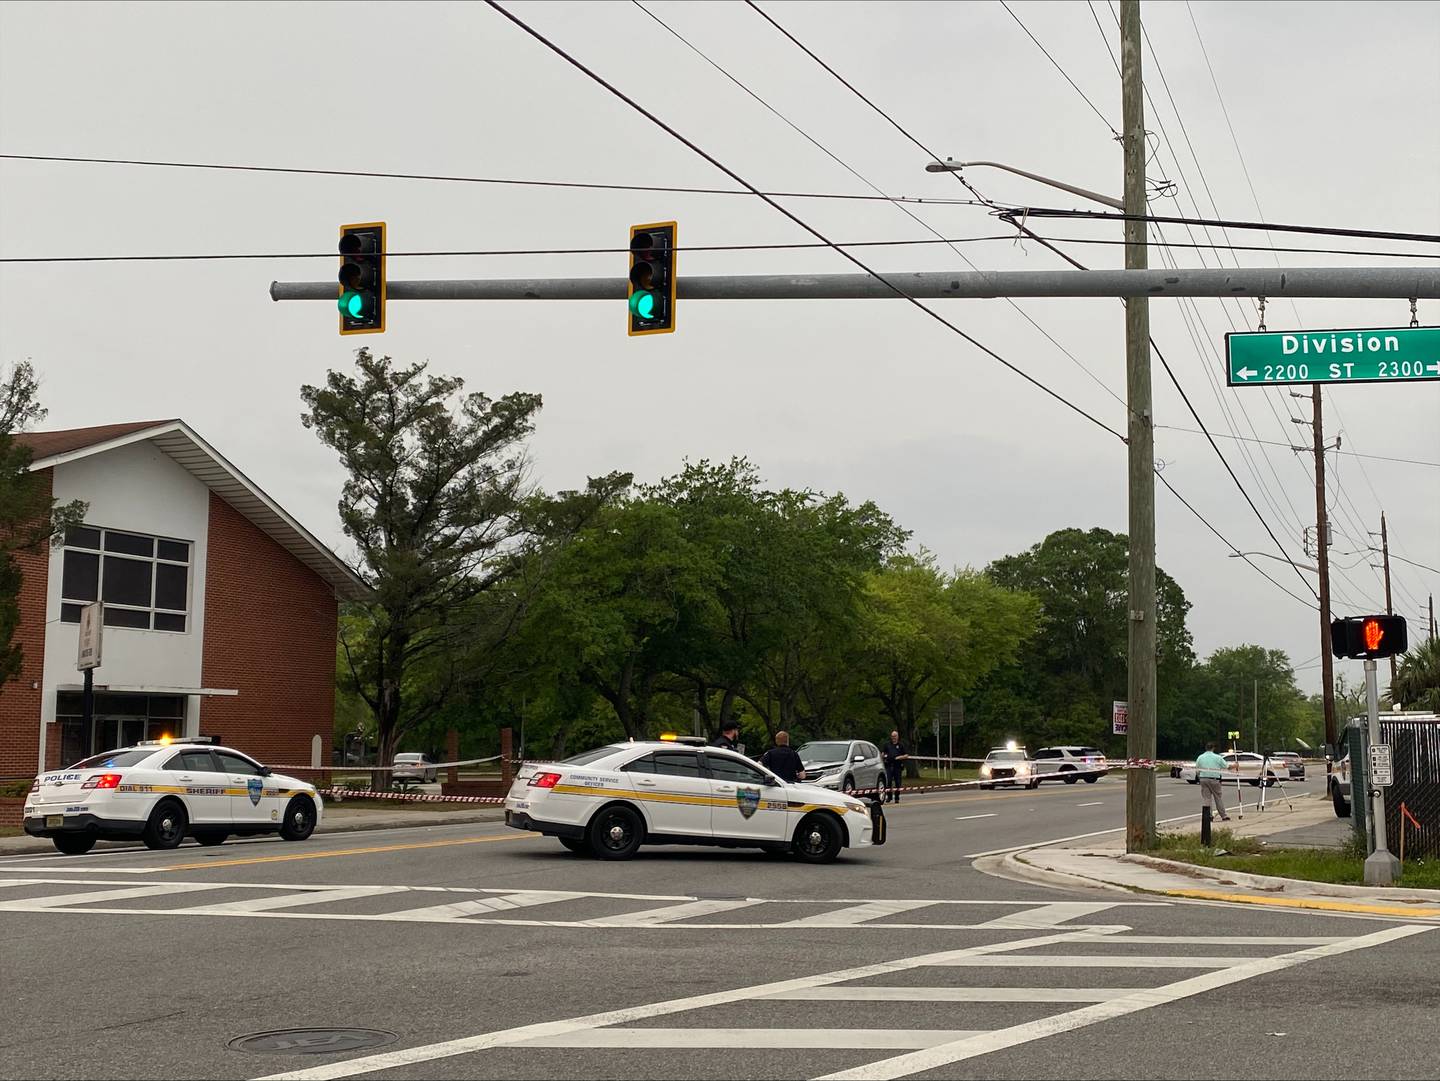 Boy, 13, hit by car while crossing street, Jacksonville police say.